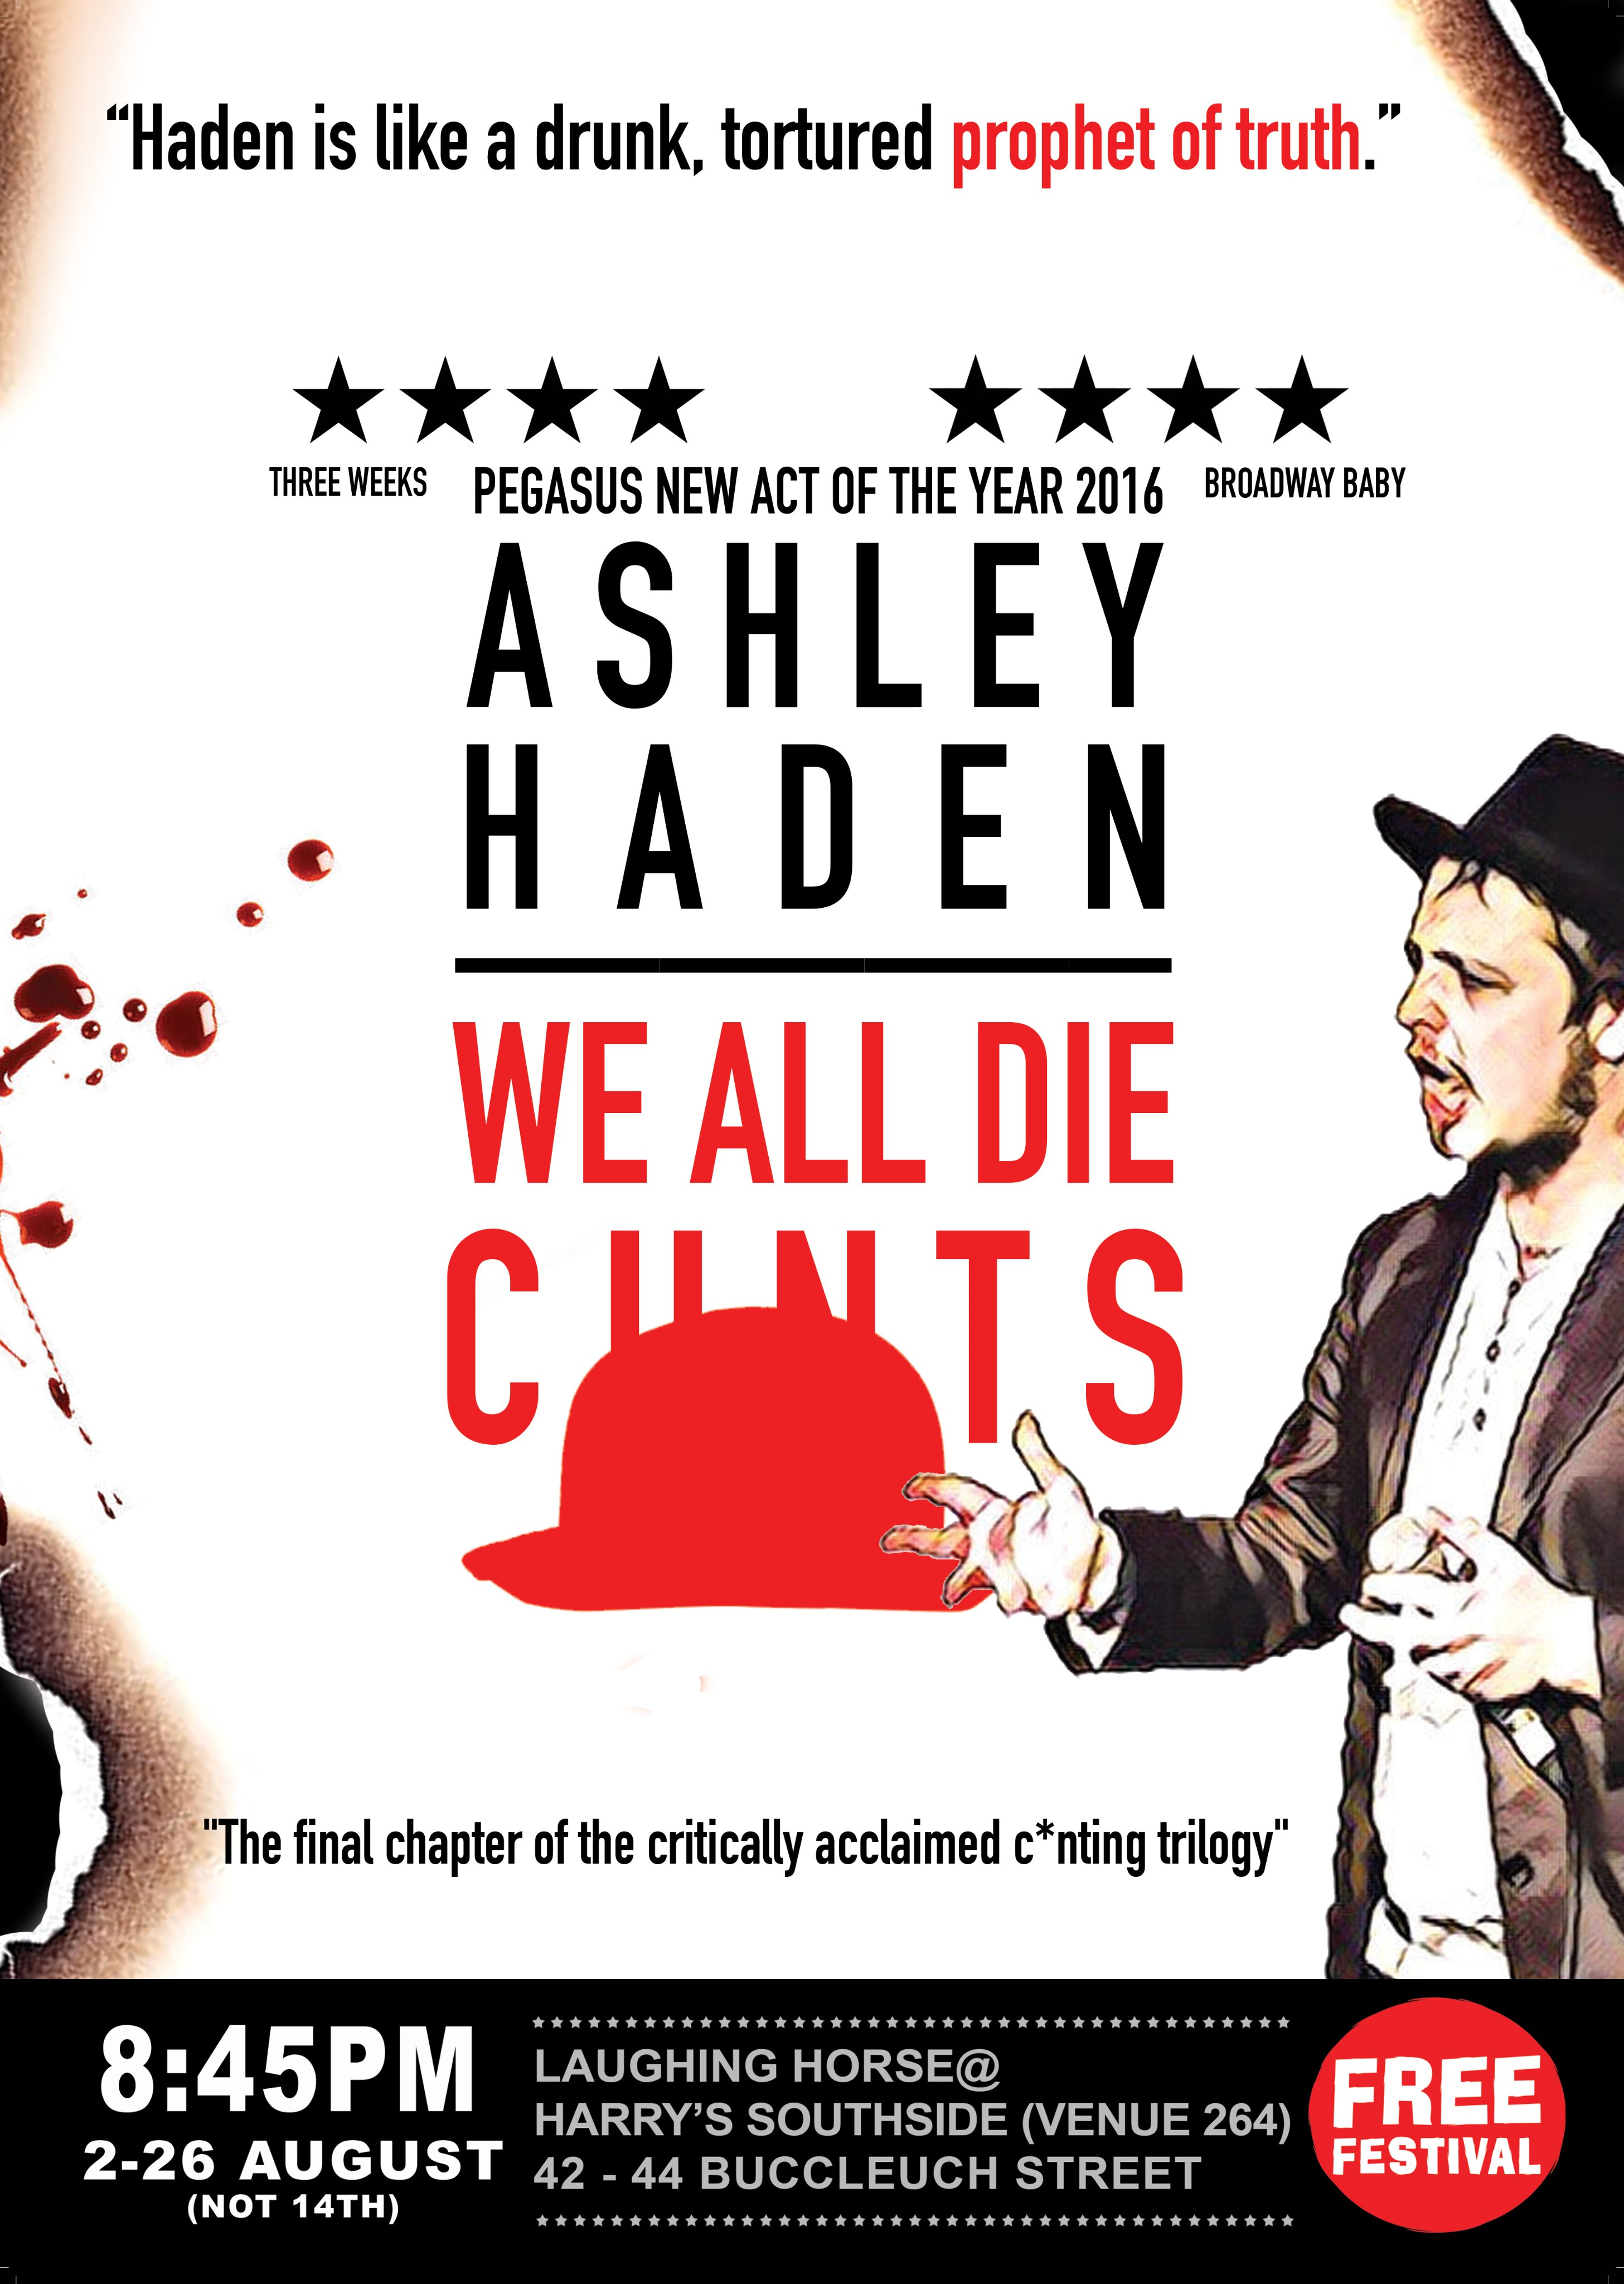 The poster for Ashley Haden: We All Die C*nts